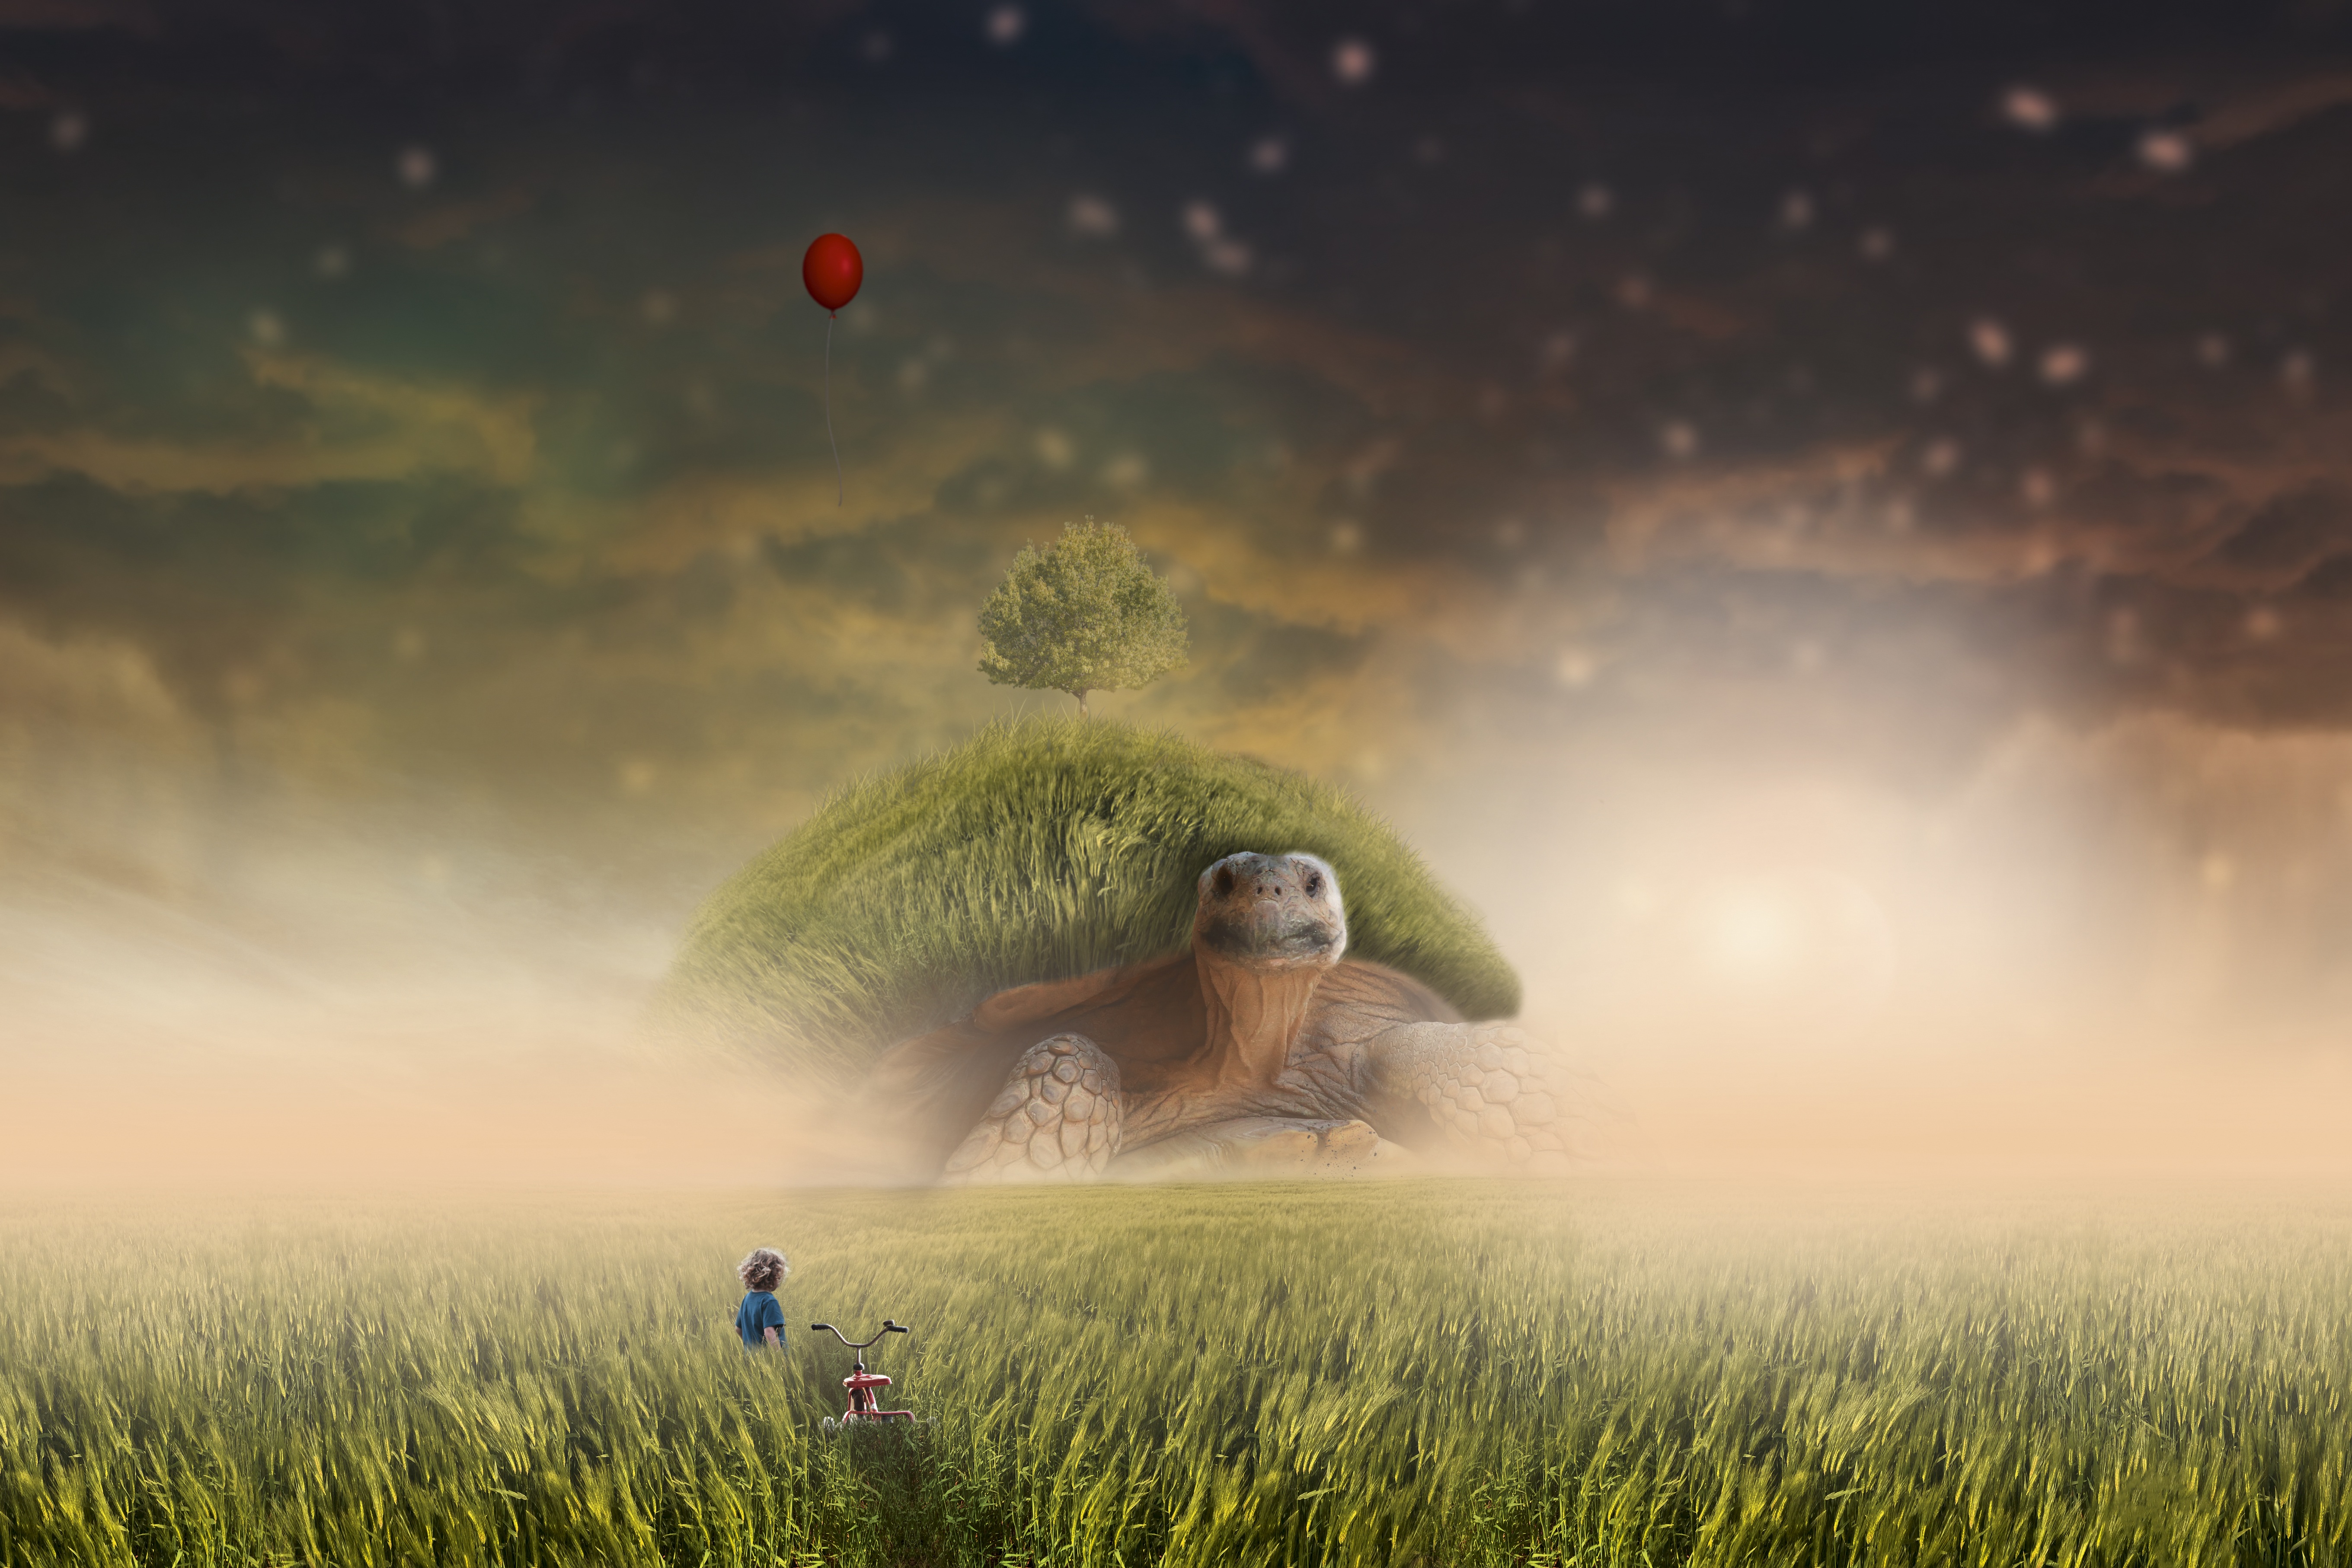 turtle, grass, art, field, photoshop, child, bicycle Full HD